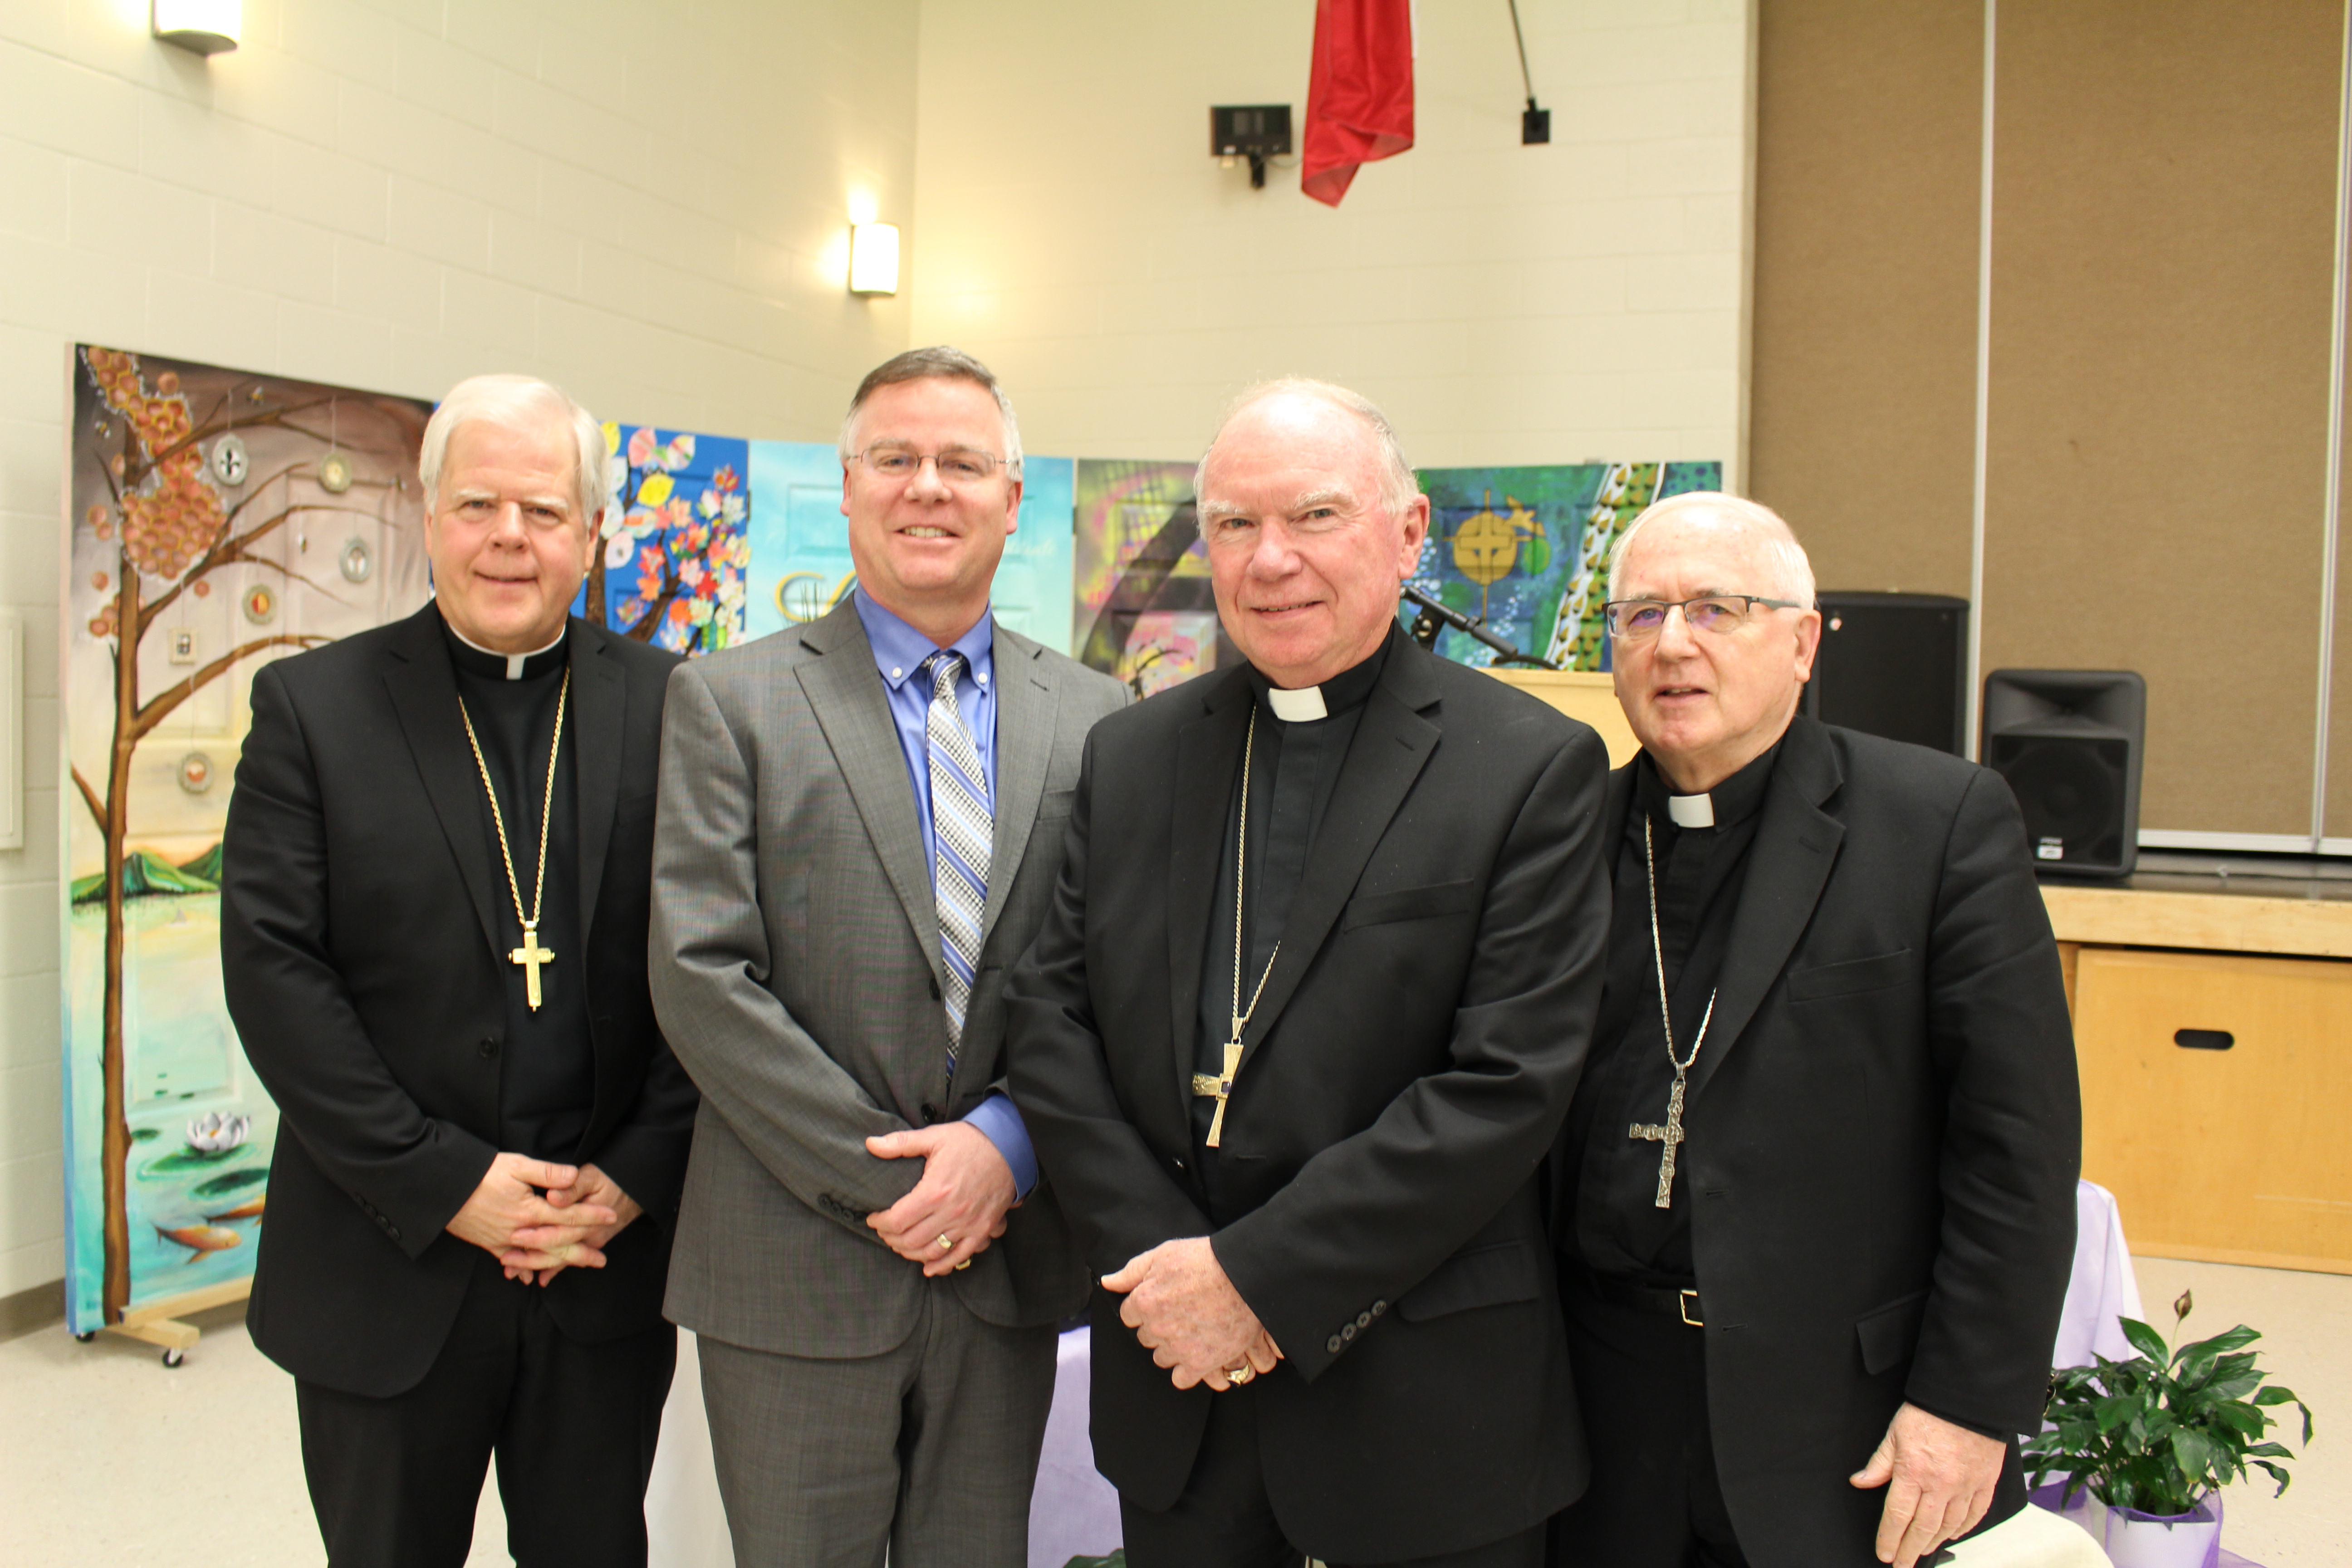 Thumbnail for the post titled: Catholic Education Coalition Regional Event – Keynote by Bishop Gerard Bergie